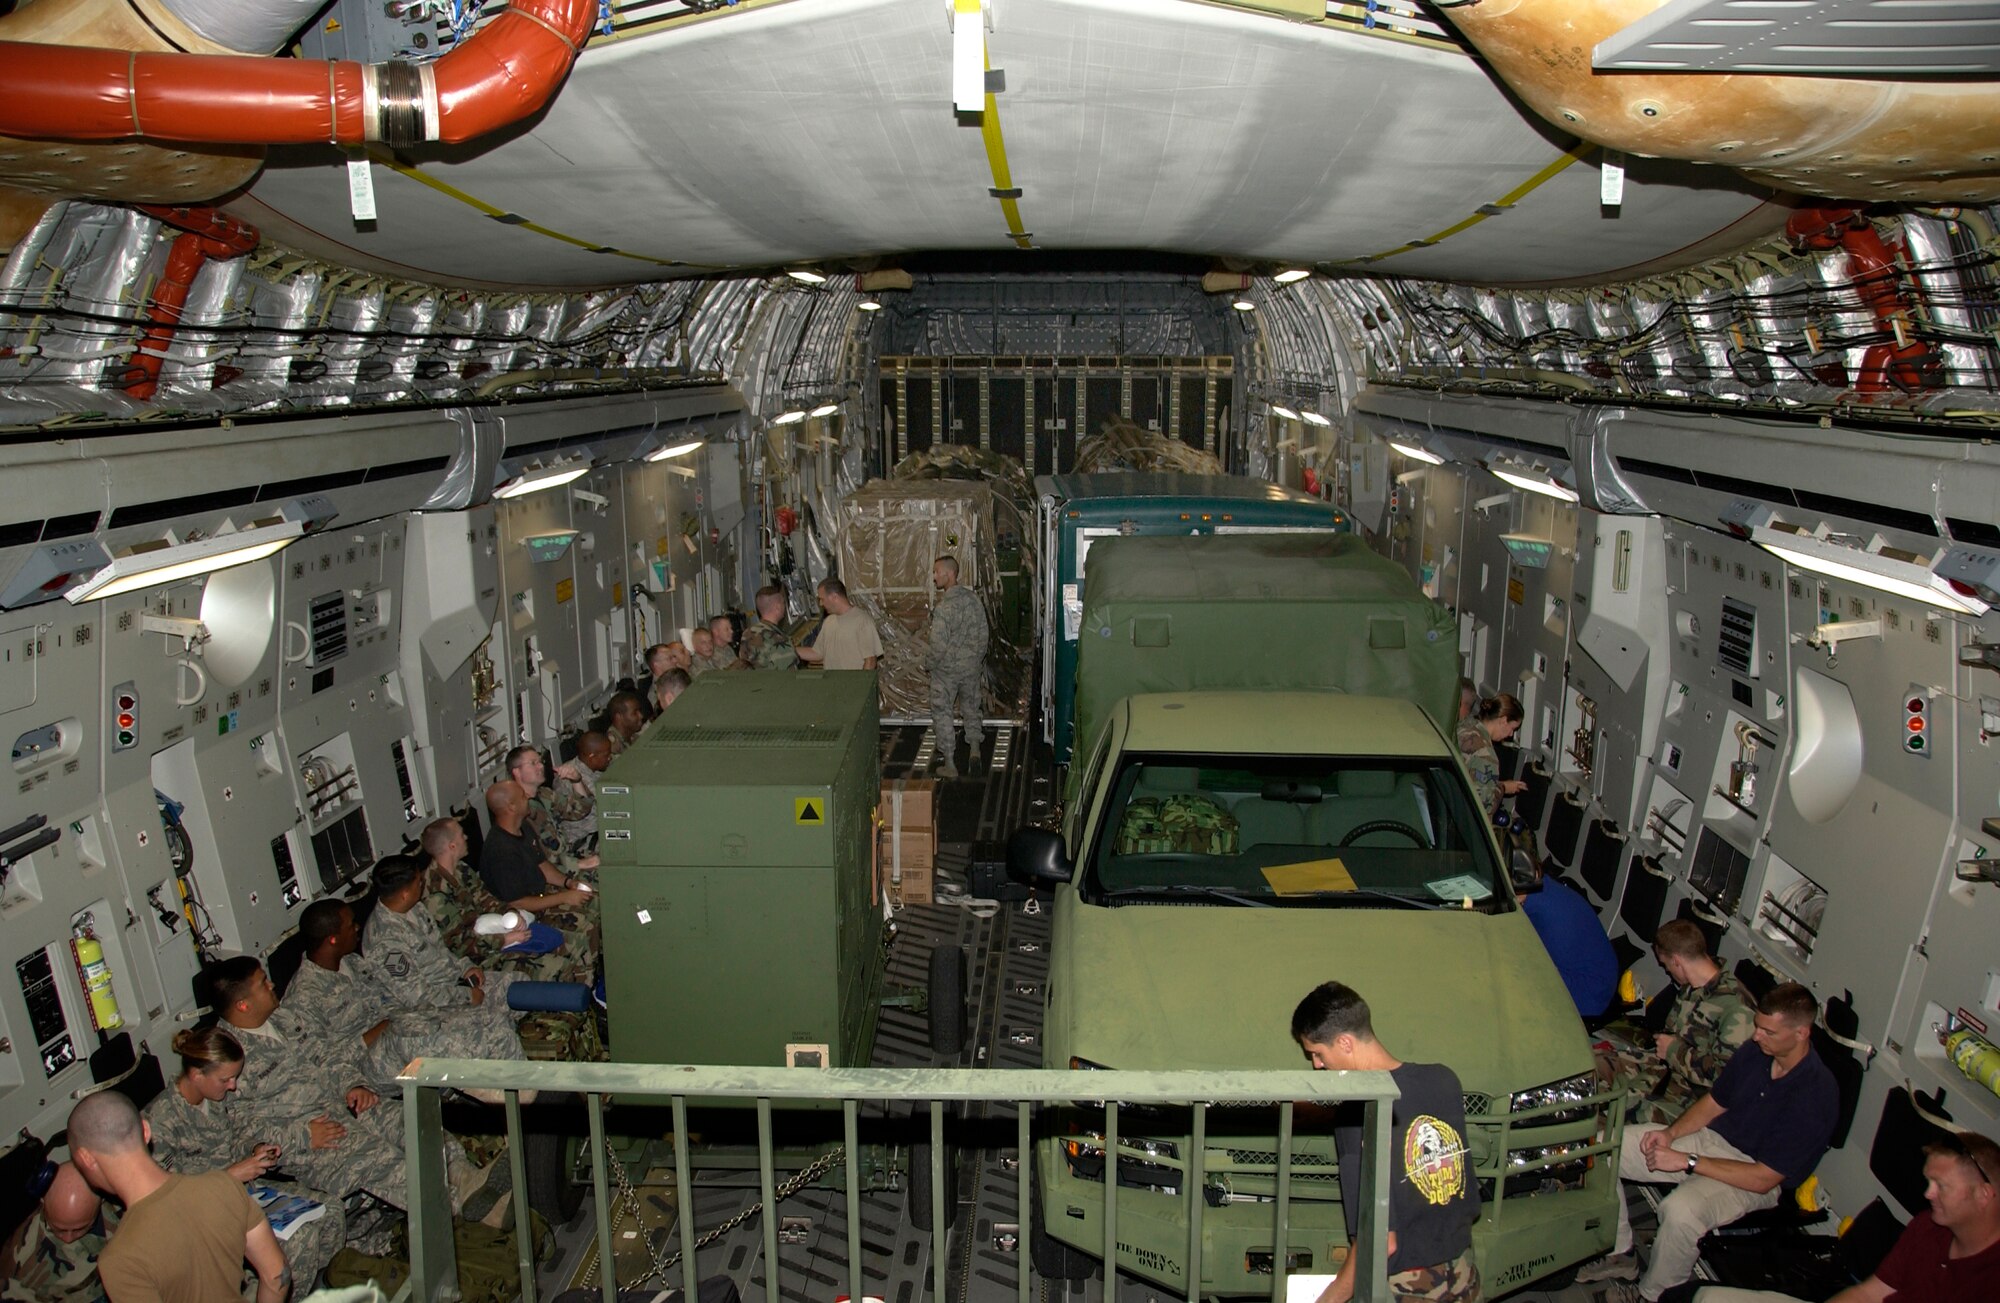 ANDERSEN AFB,GUAM -- Just under 50 members of the 36th Contingency Response Group settled into their seats in a crowded cargo section of the C-17 Globemaster III aircraft.  The personnel and equipment are heading to Thailand to stand ready to provide humanitarian aid to the people of Burma (Myanmar).  Units of all branches of the military are standing by, for an offical request from the Burma (Myanmar) government, to render aid to a country and people ravaged by massive flooding from
 Cyclone Nargis. (US Air Force Photo by Tech. Sgt. Michael Boquette)